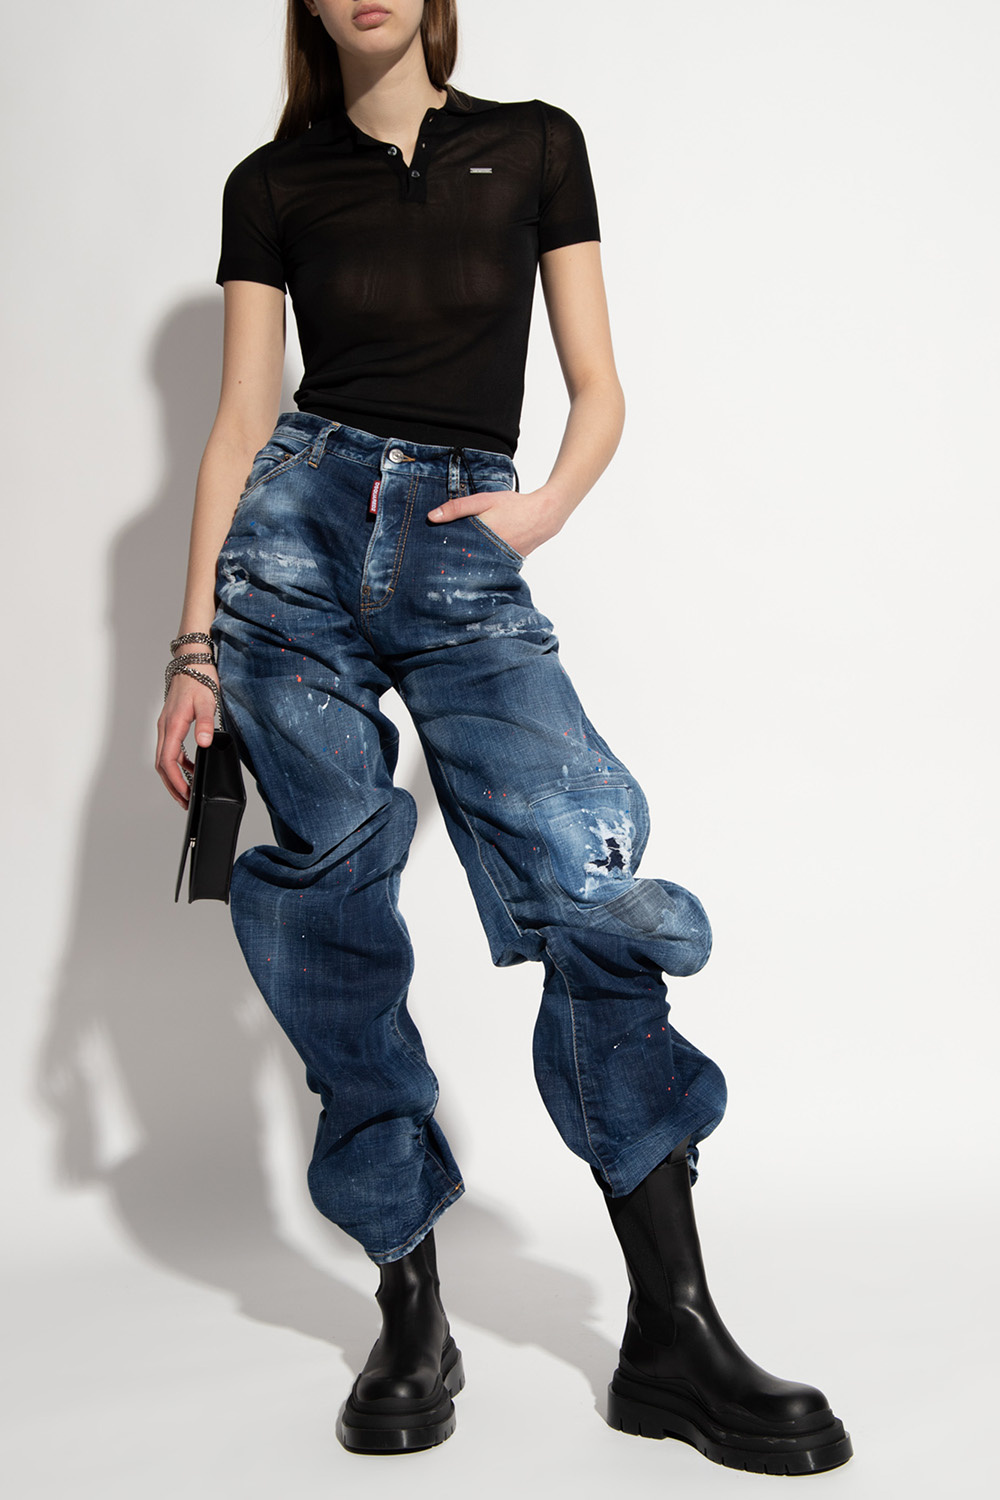 Dsquared2 ‘Over Jazz Jean’ jeans